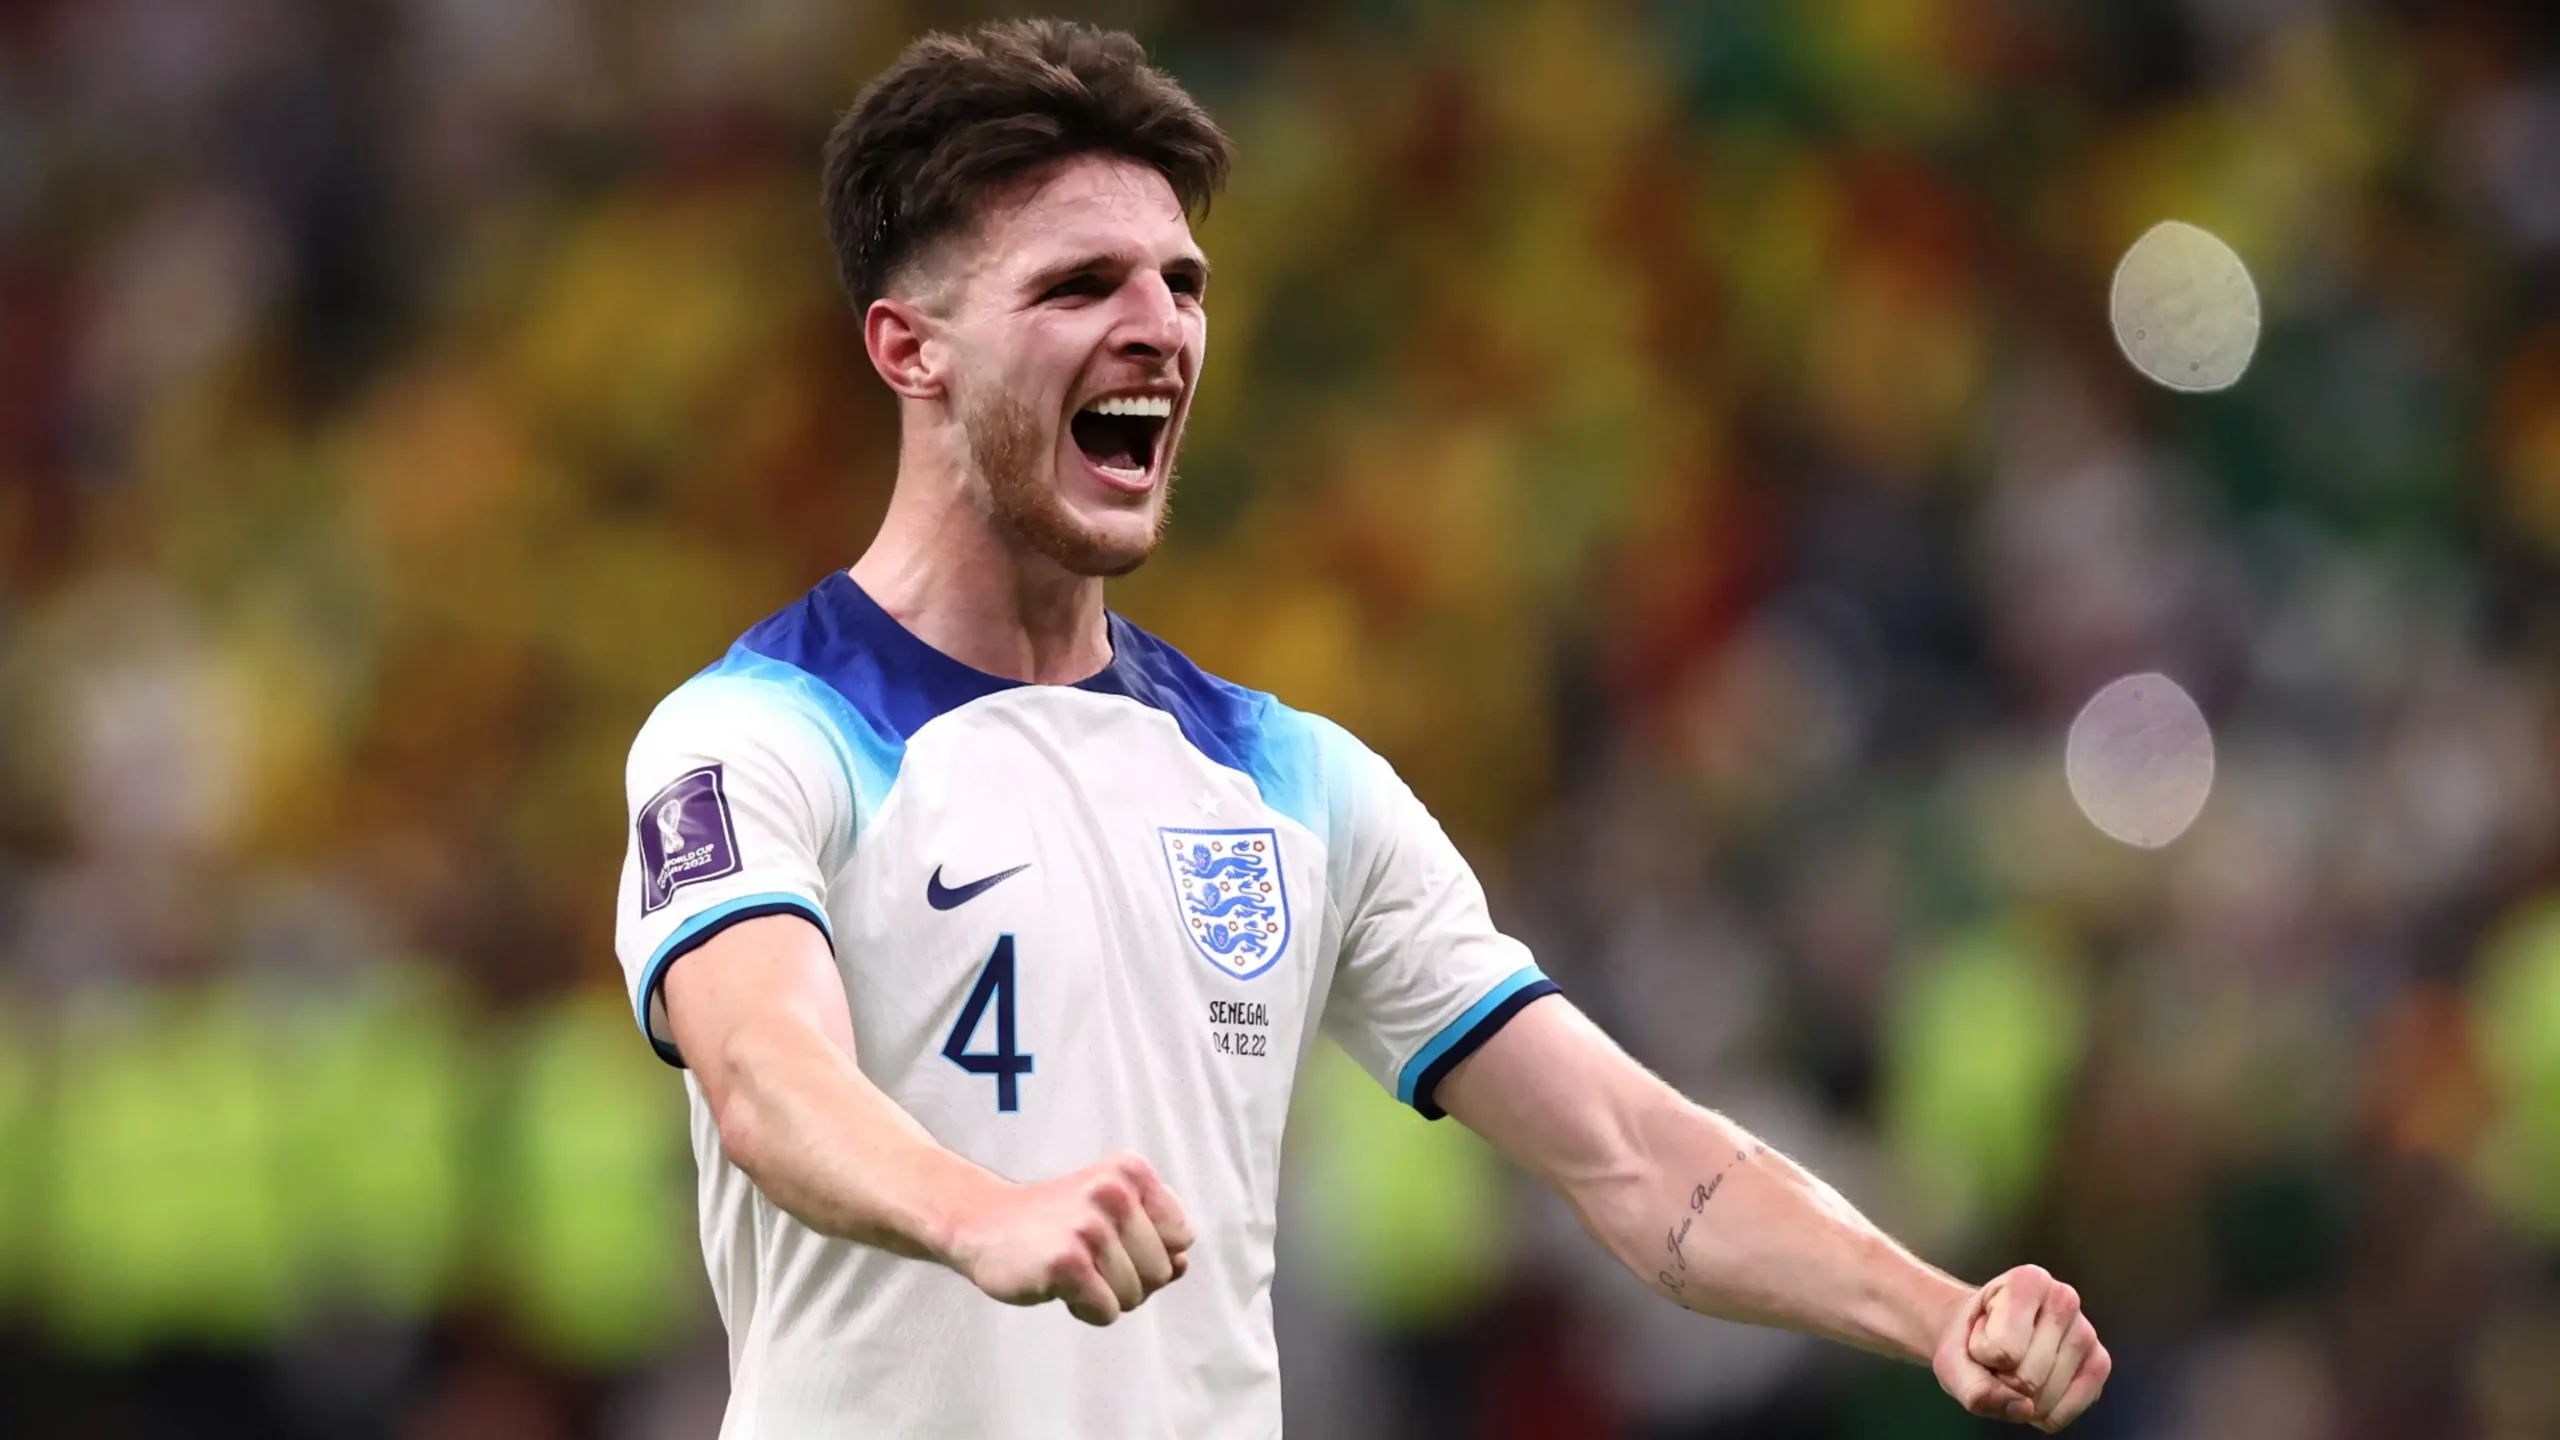 "Declan Rice: England Ready to Make Waves in World Cup 2022"